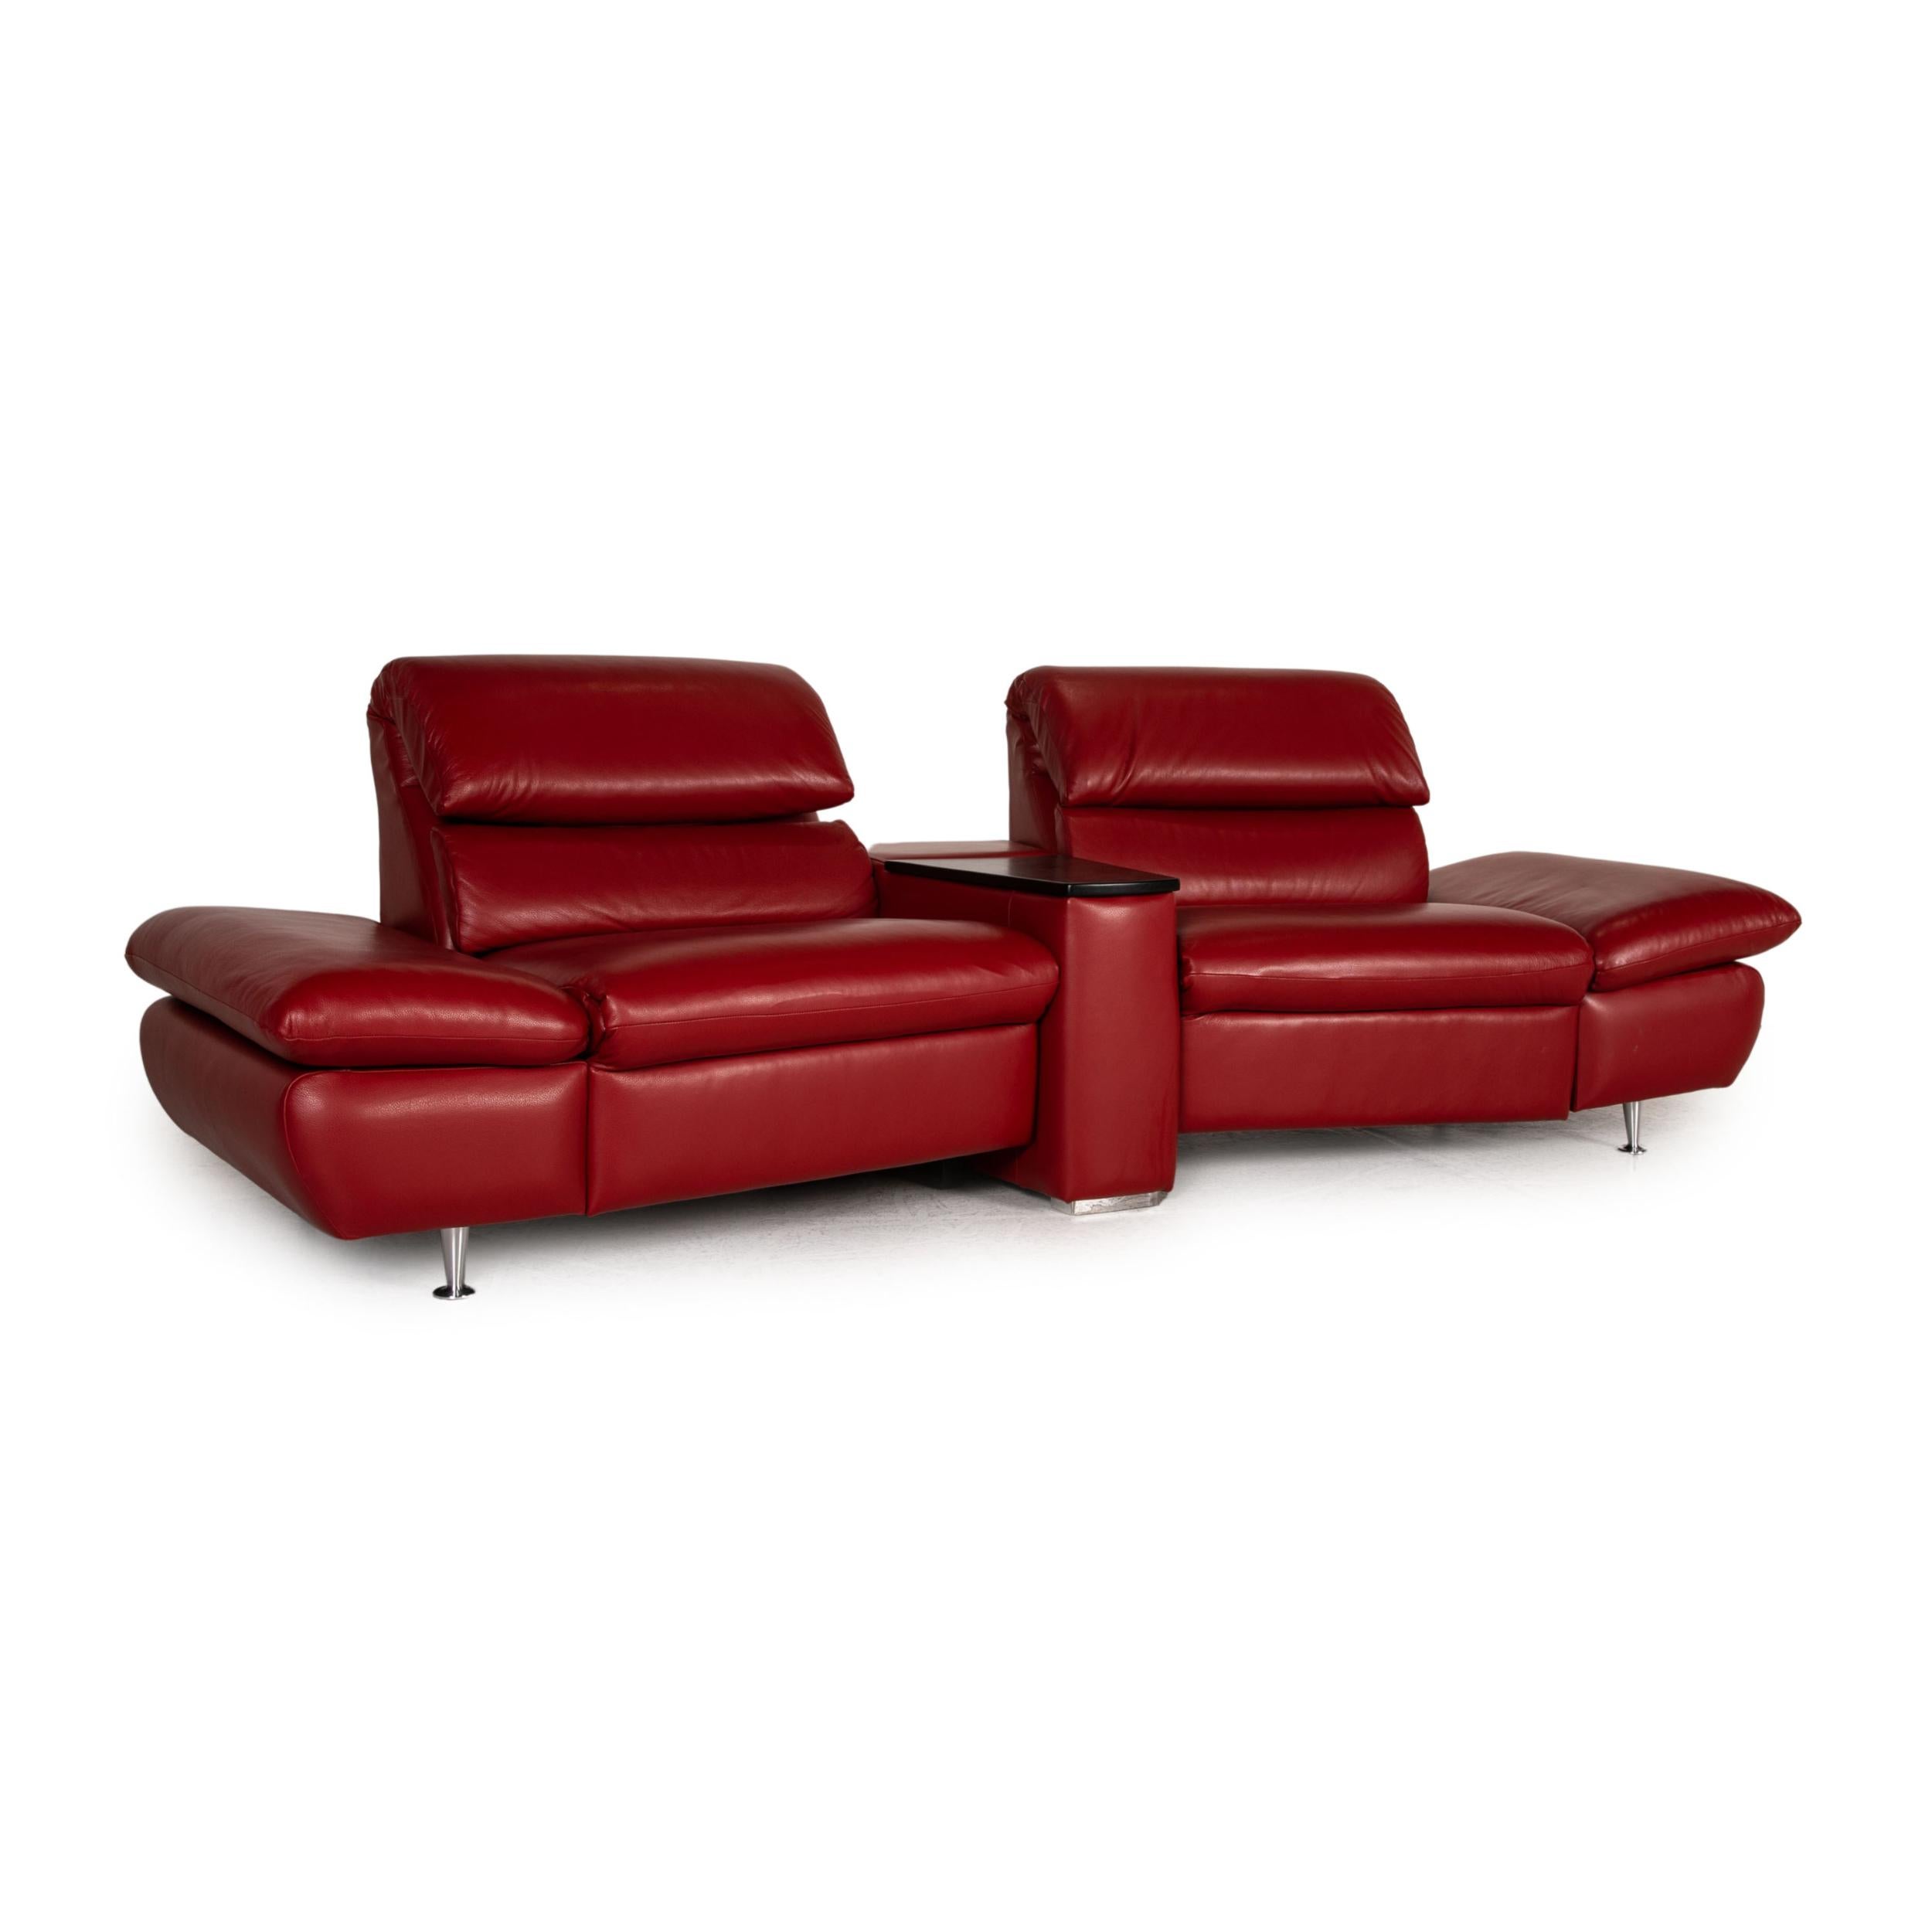 Contemporary Hjort Knudsen Danish Design Barbardos Leather Sofa Red Two-Seater Couch For Sale